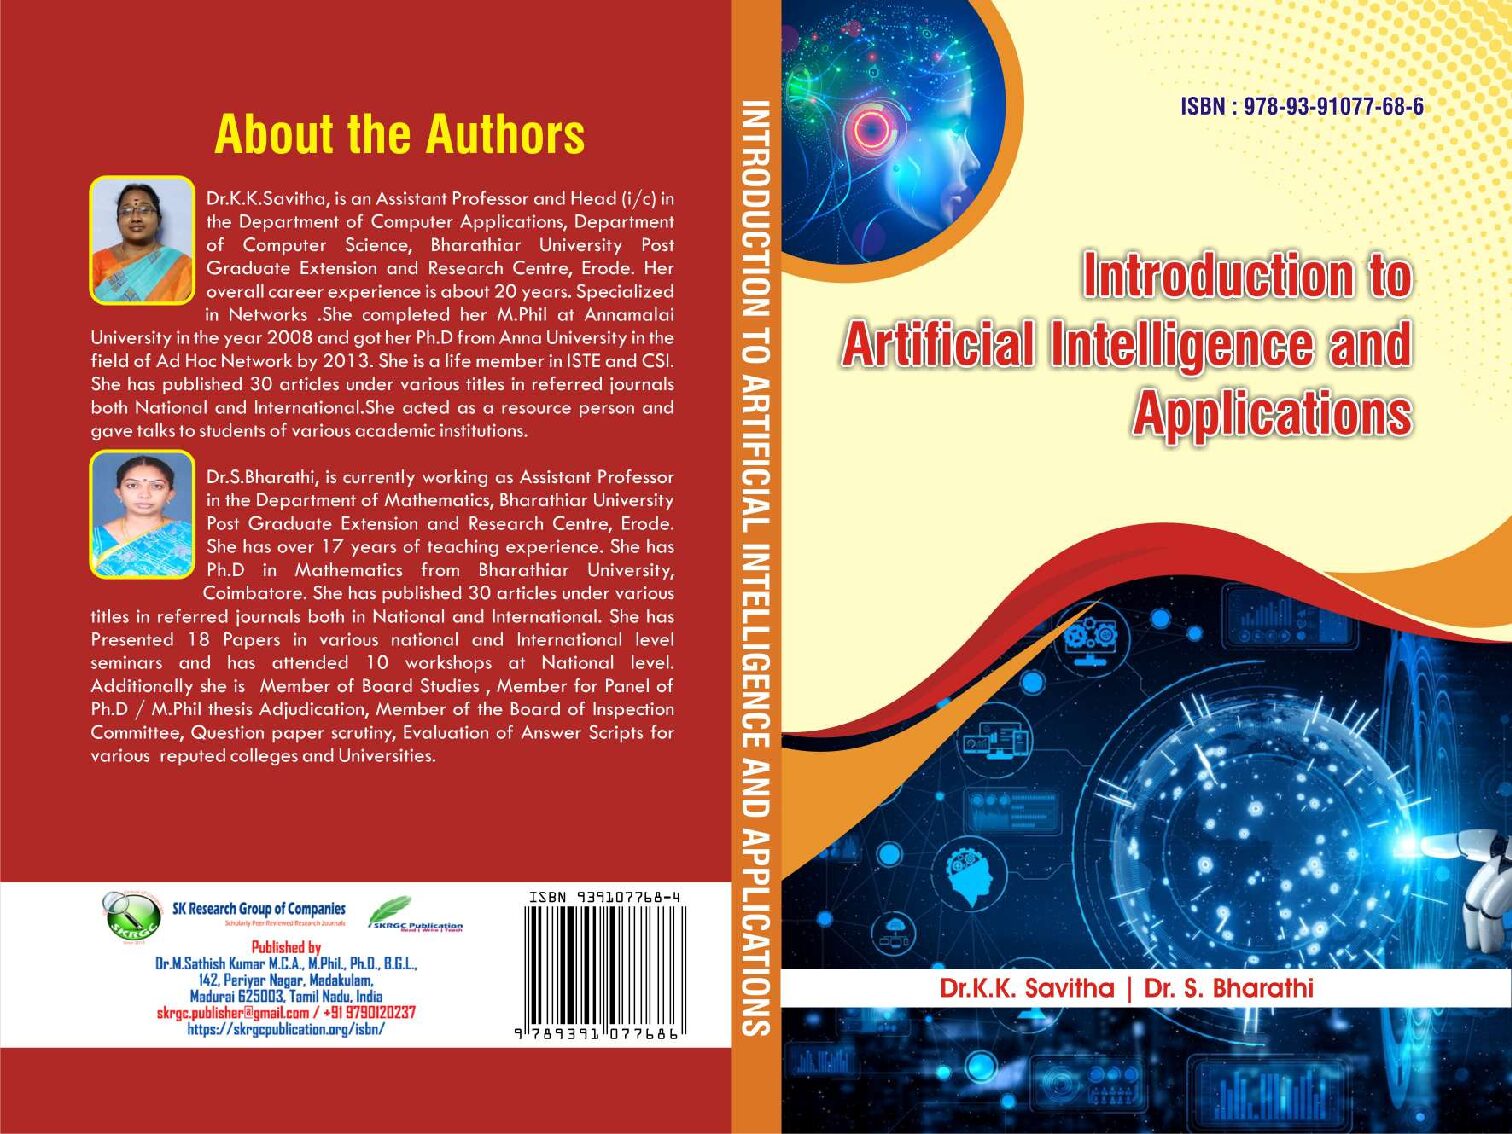 Introduction to Artificial Intelligence and Applications